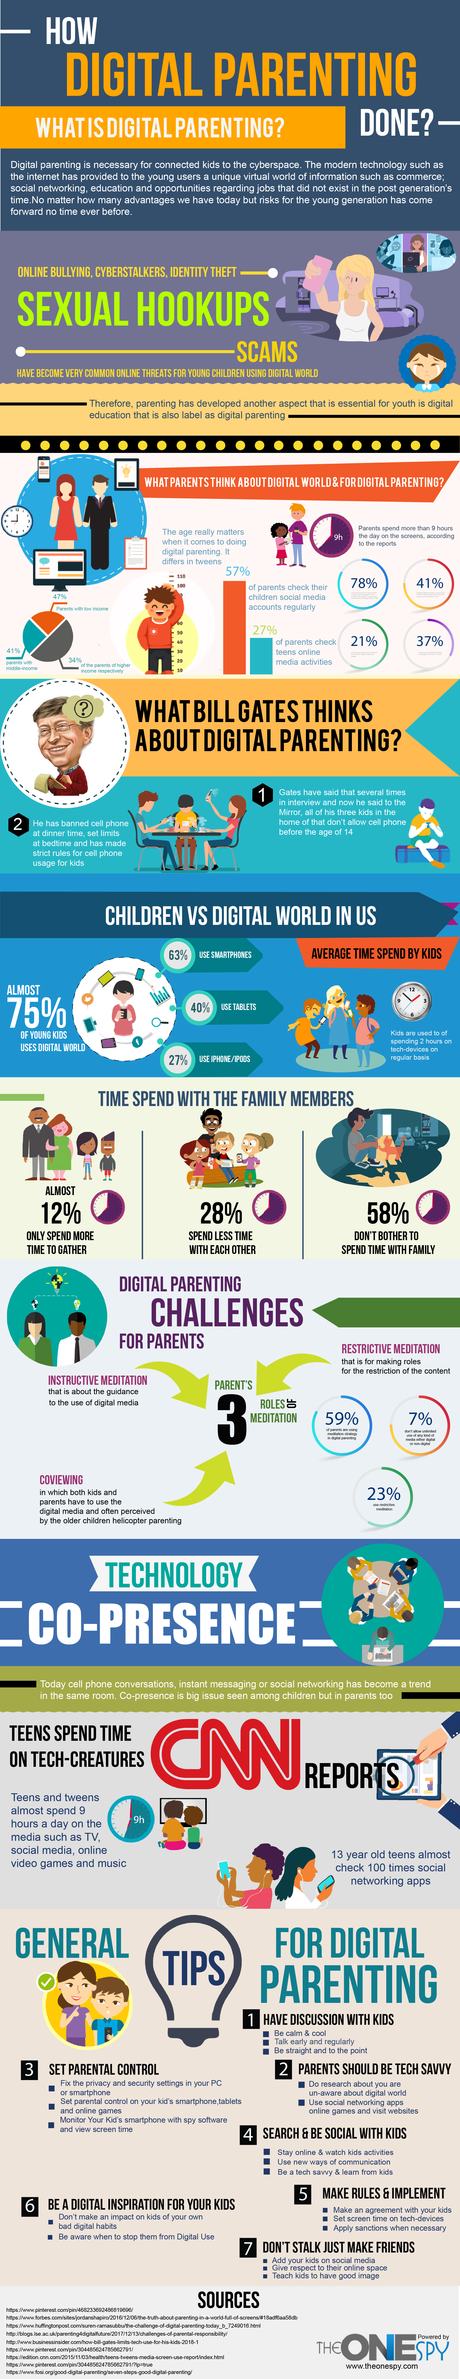 How Digital Parenting Done – Infographic